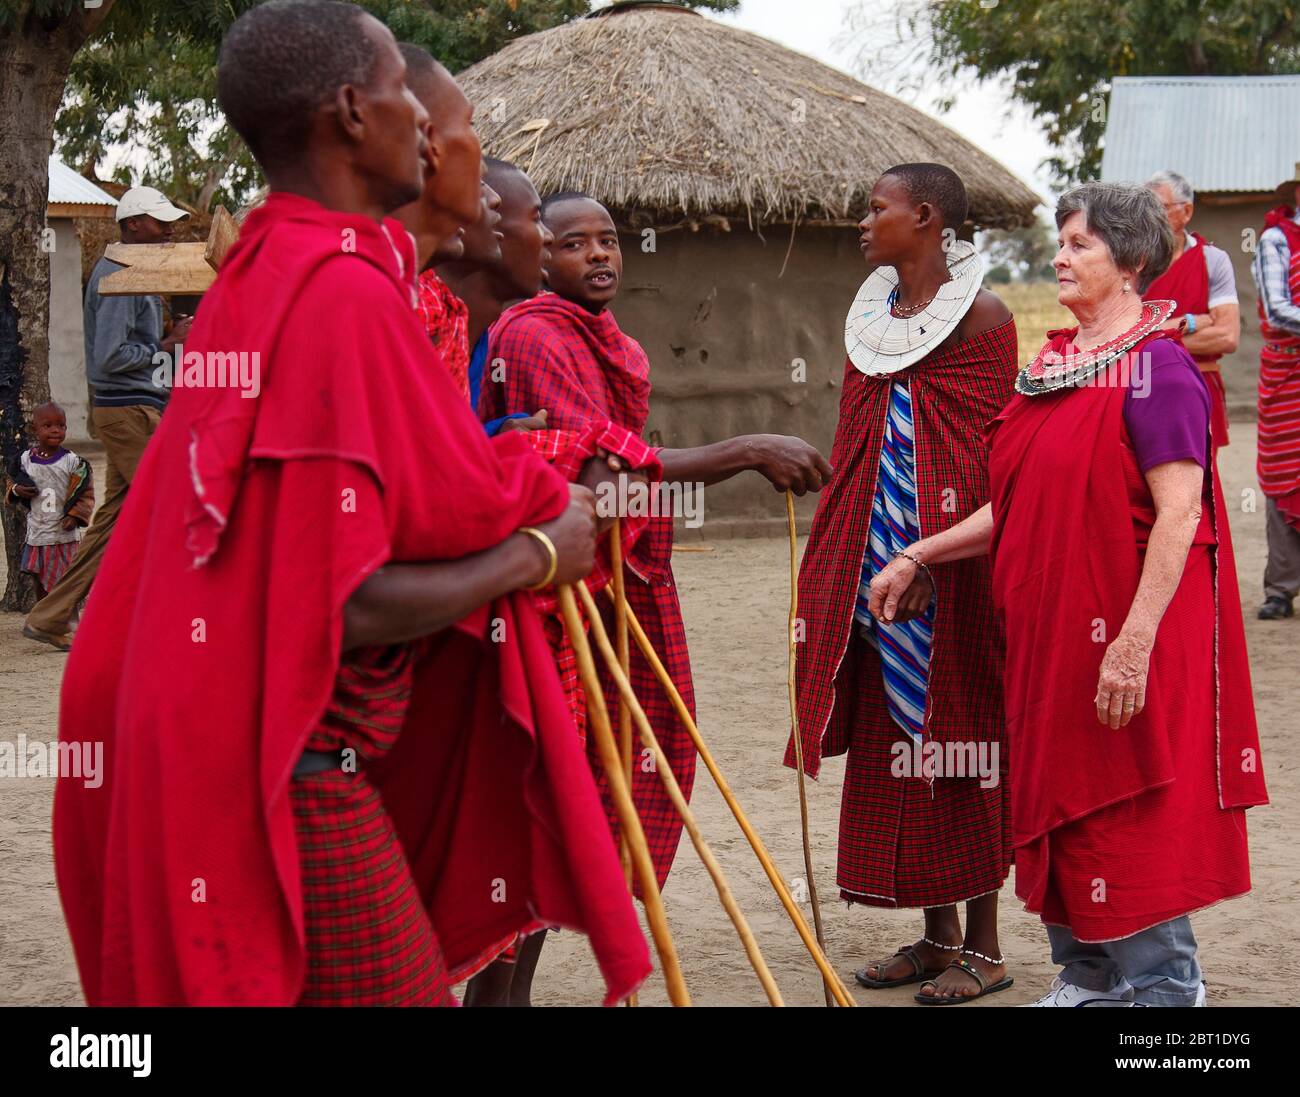 Maasai men, woman, female visitor, presenting to warriors, village; indigenous people; traditional red dress, beaded double collars, travel experience Stock Photo